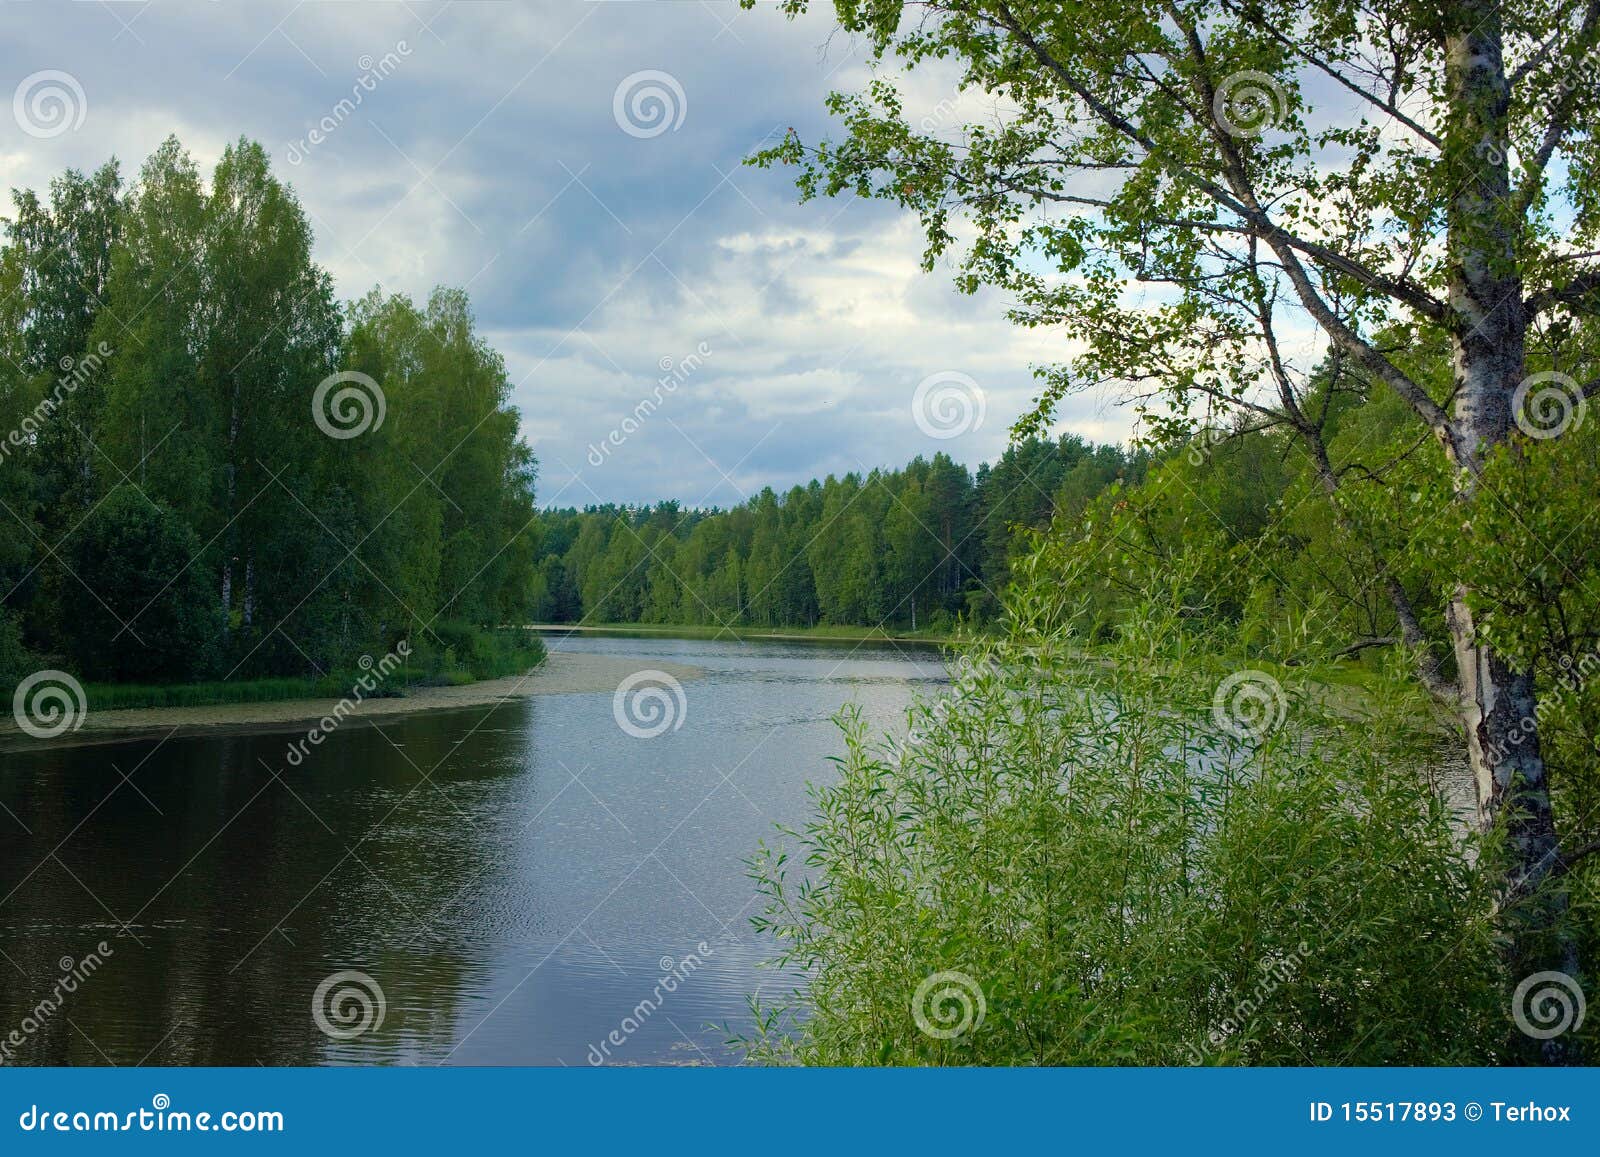 Scenic forest and river in Renko region of Finland.